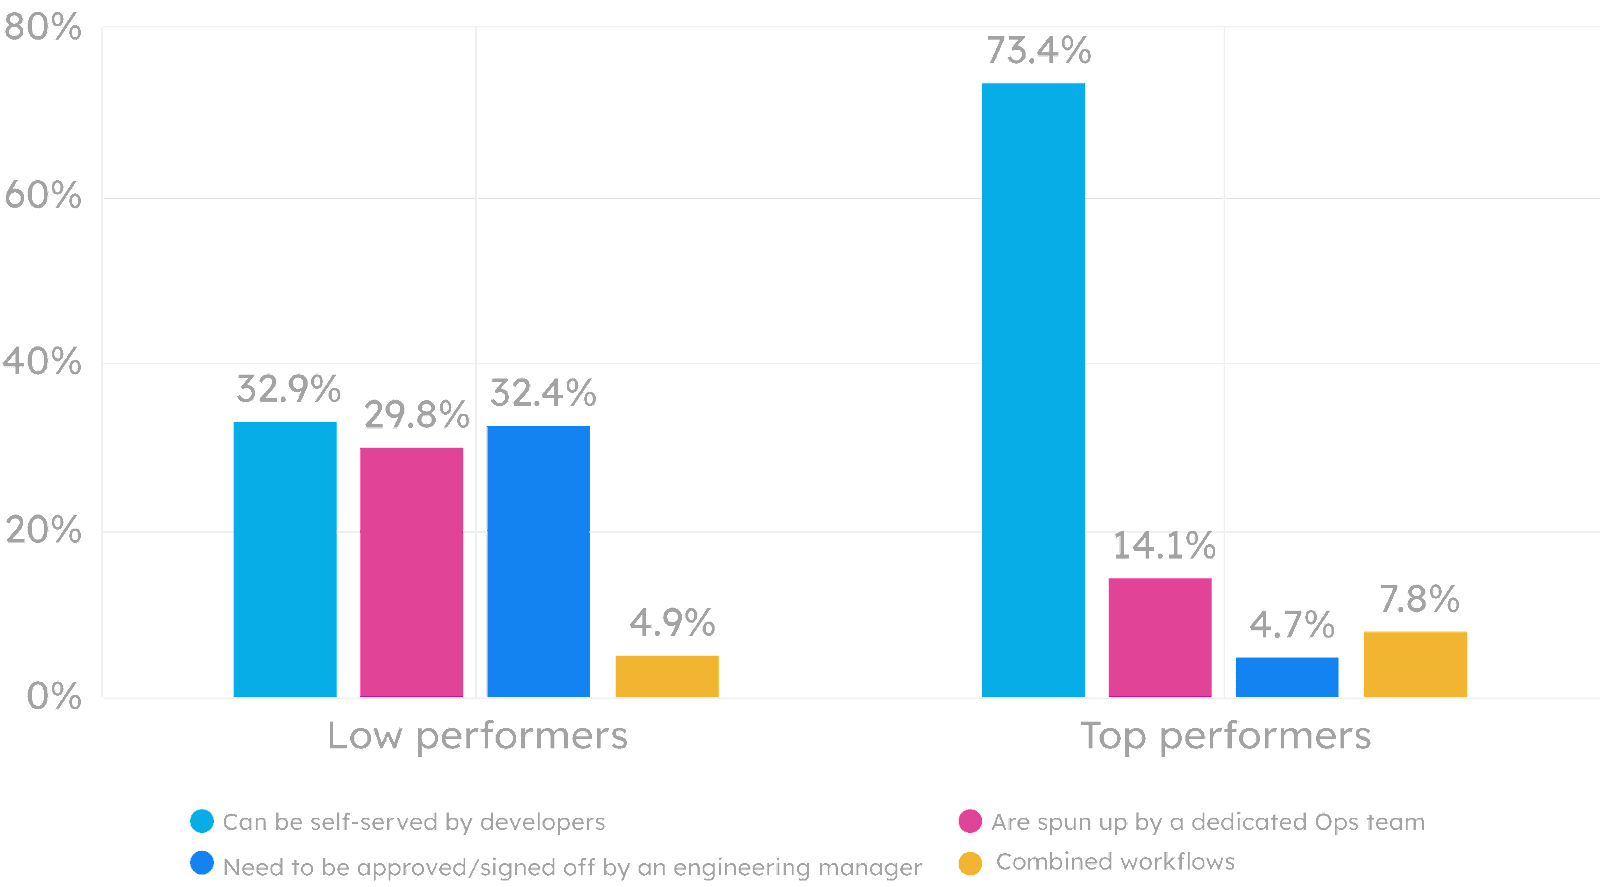 Bar chart shows low performers vs top performers